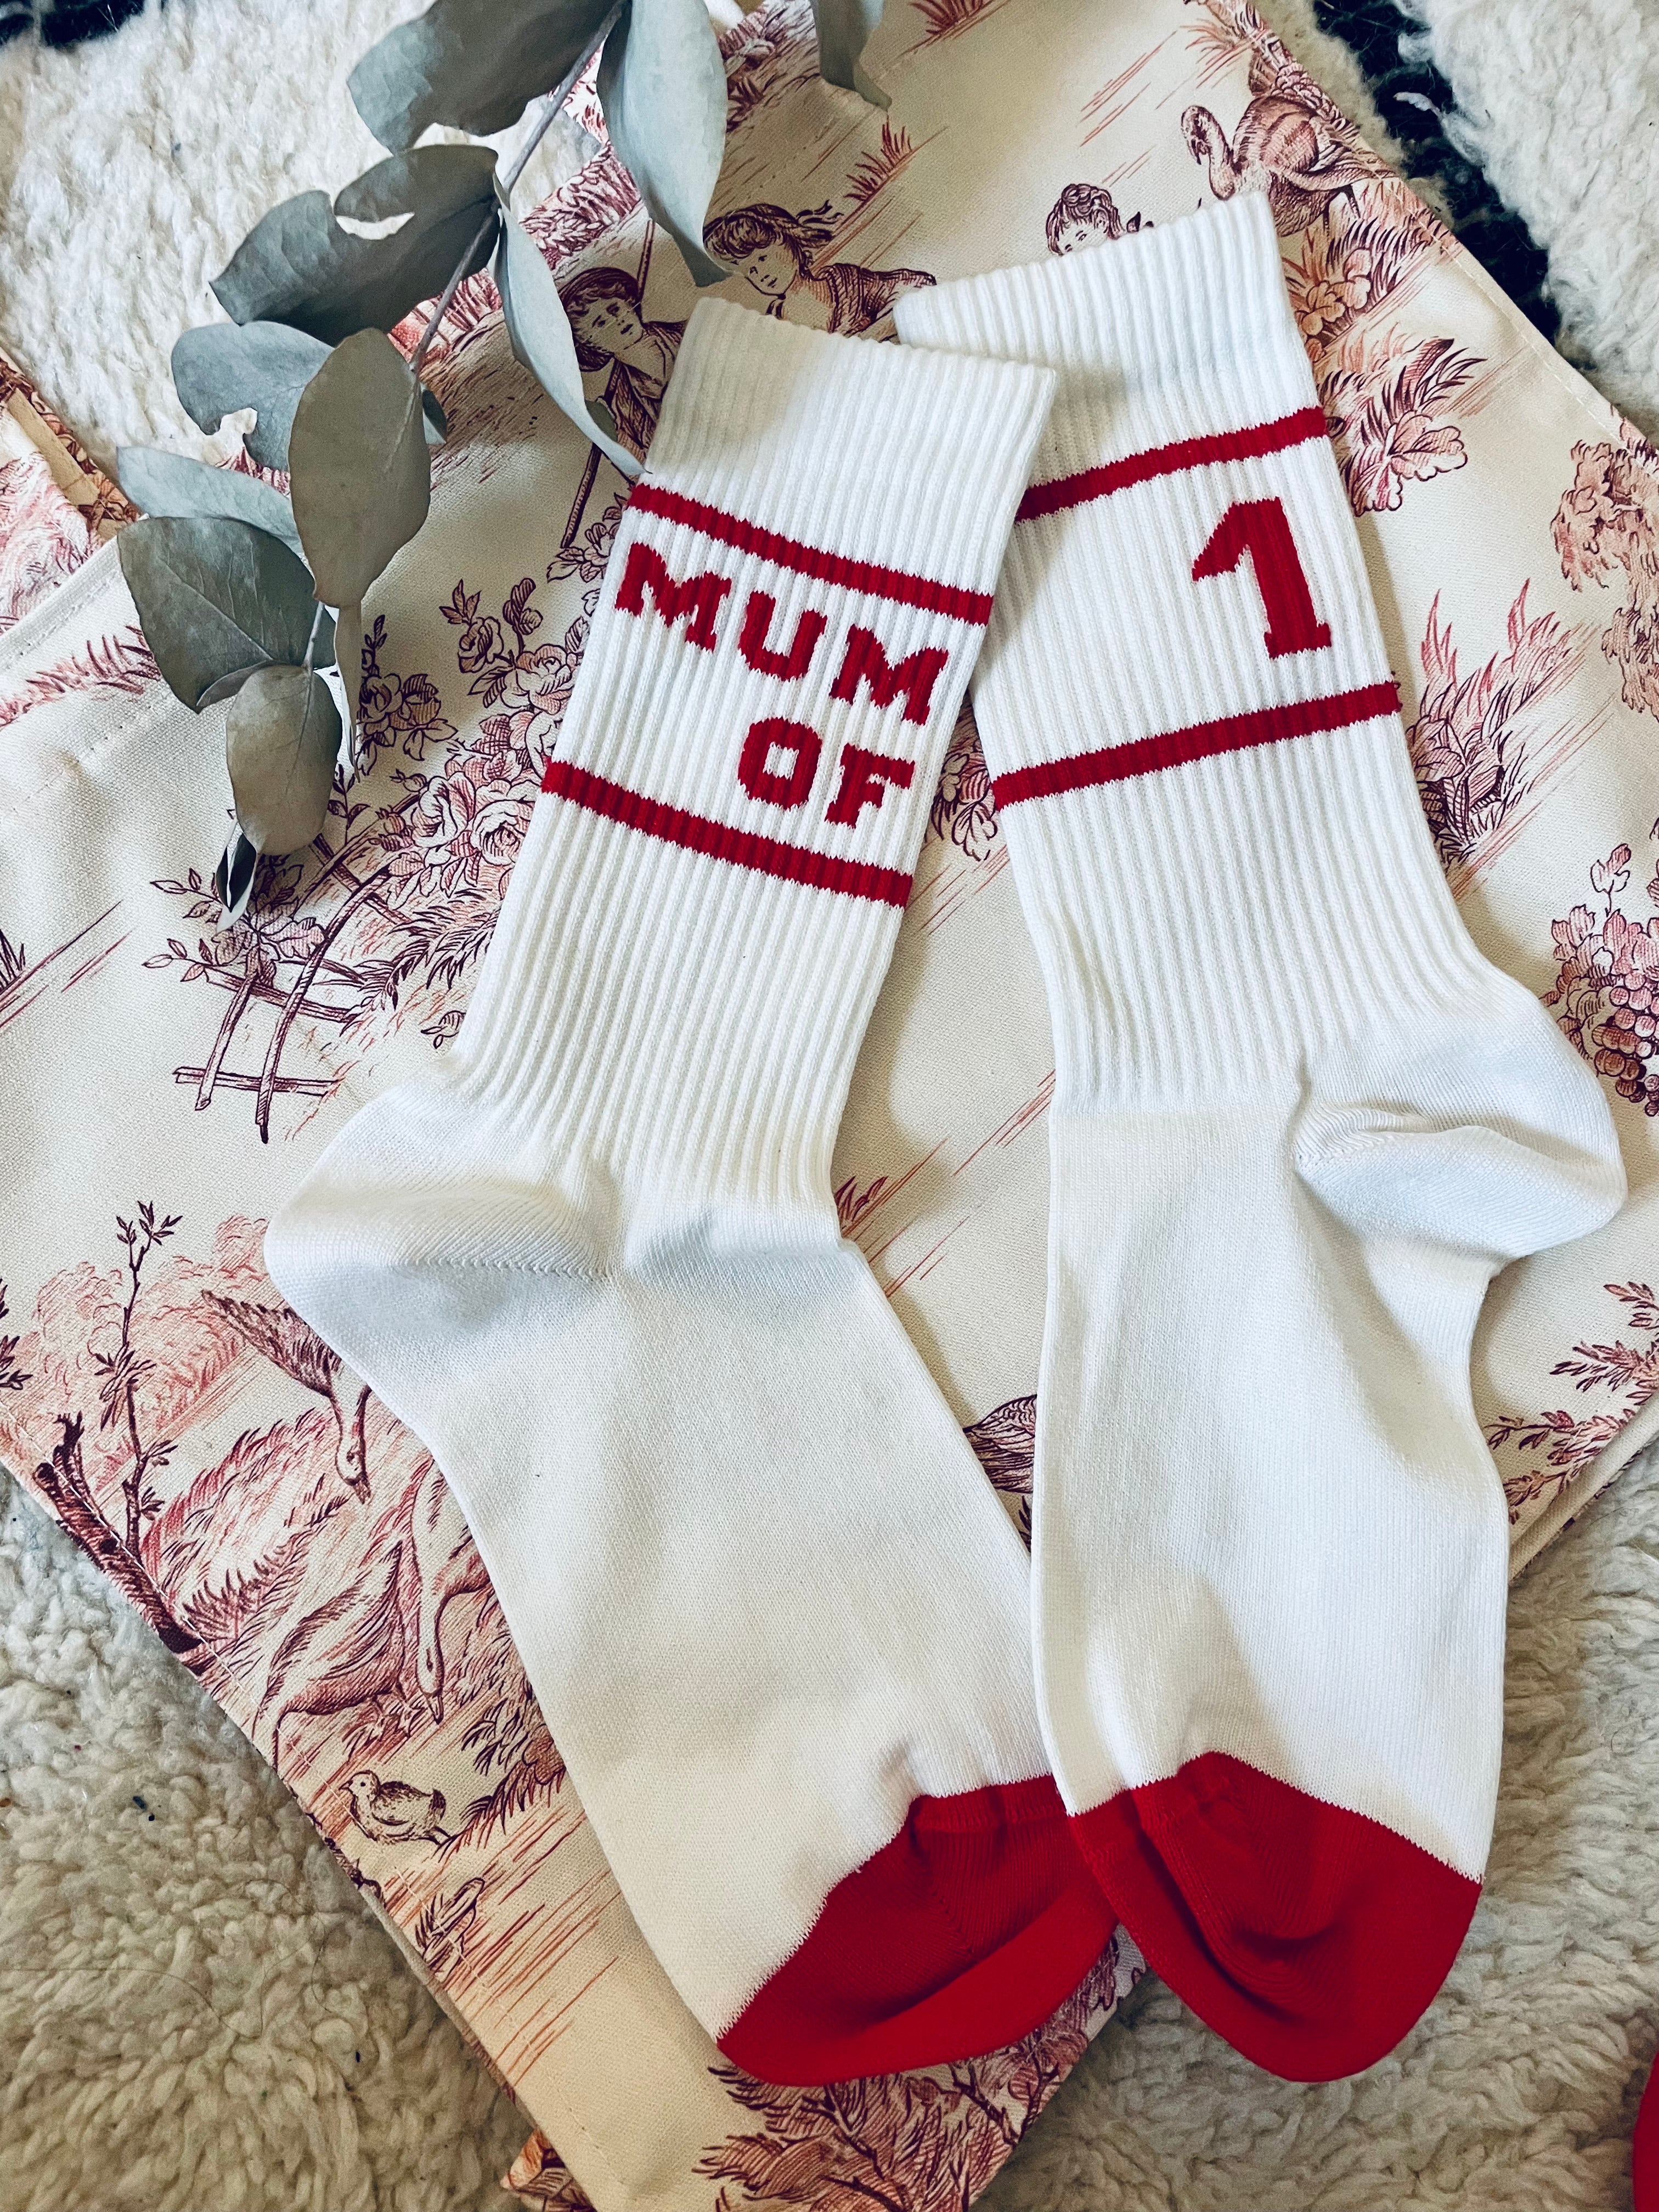 CHAUSSETTES MUM OF